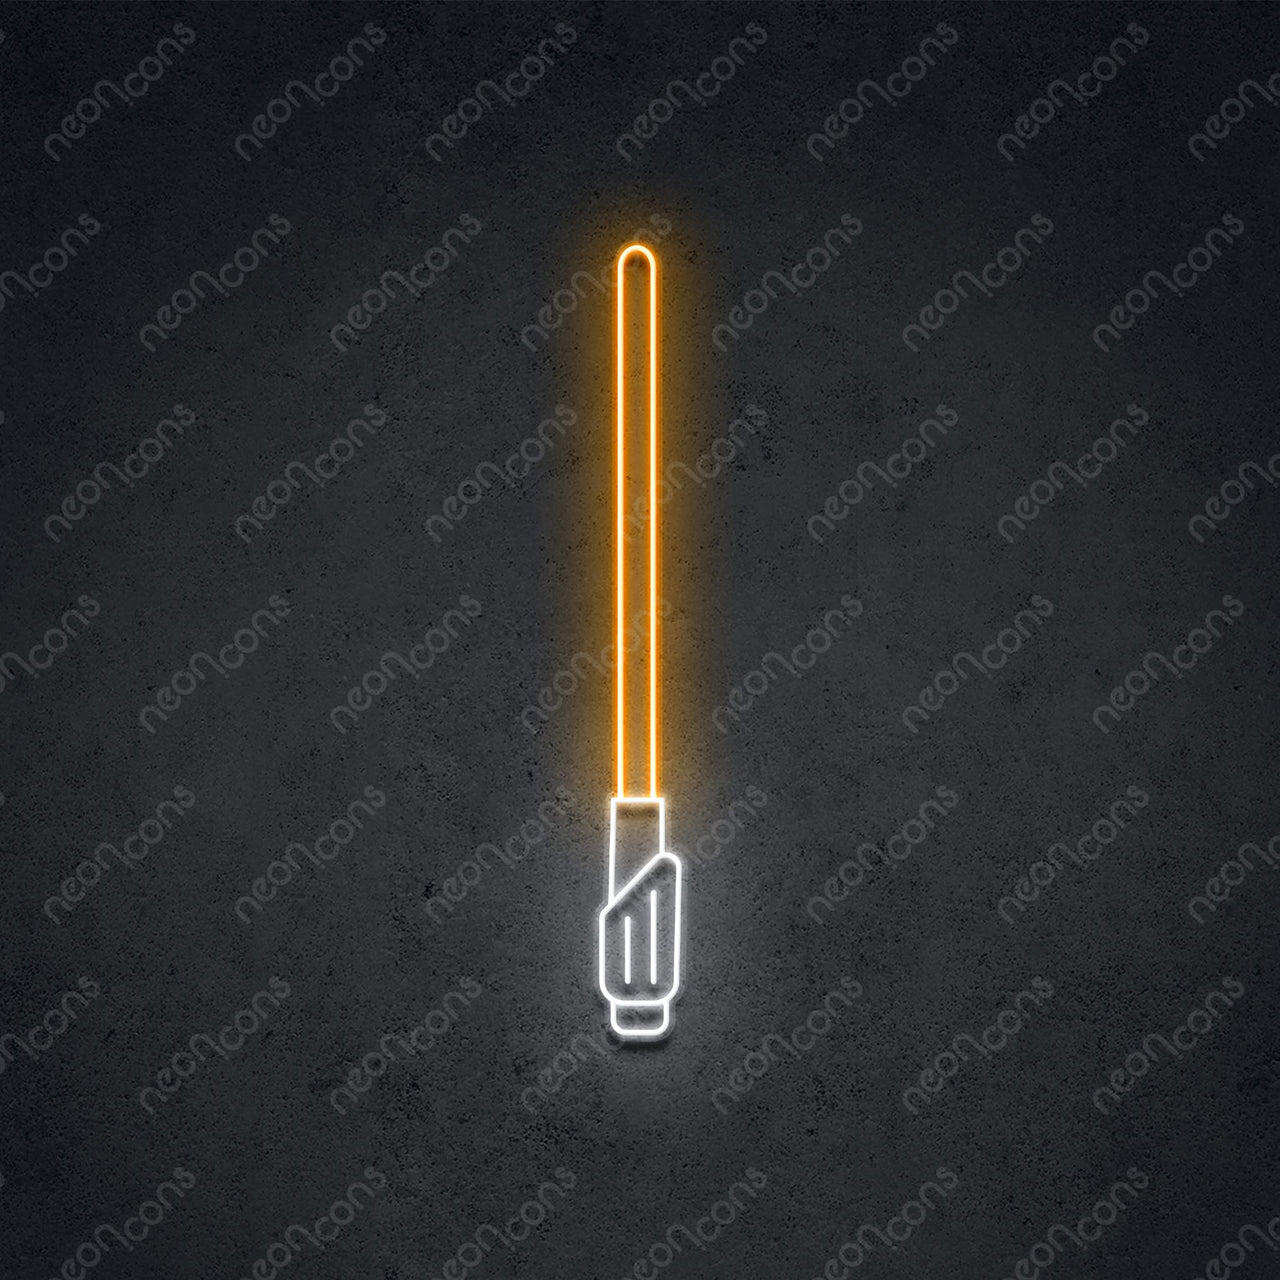 "Space Sword" Neon Sign 60cm (2ft) / Orange / LED Neon by Neon Icons